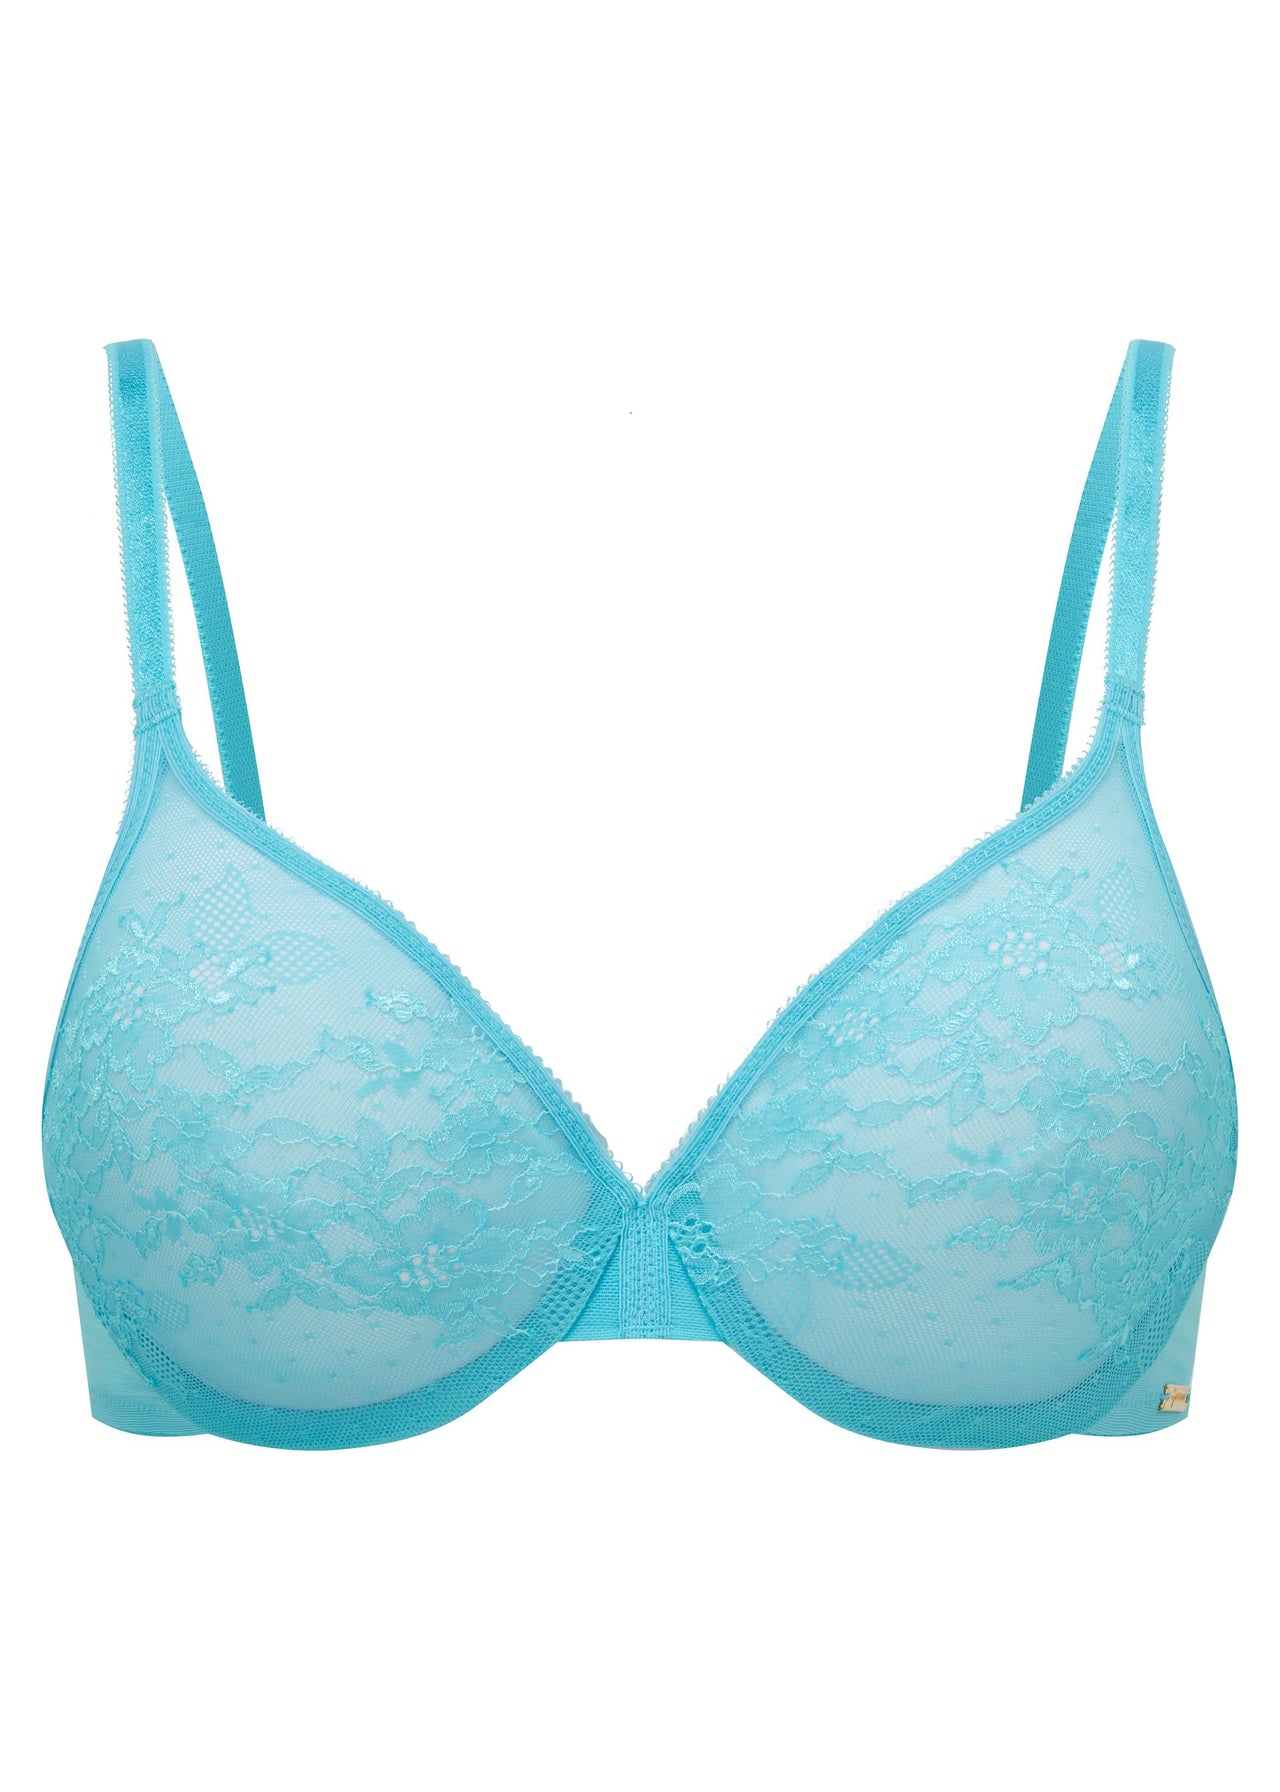 Gossard Glossies Lace Sheer Moulded Bra - Turquoise